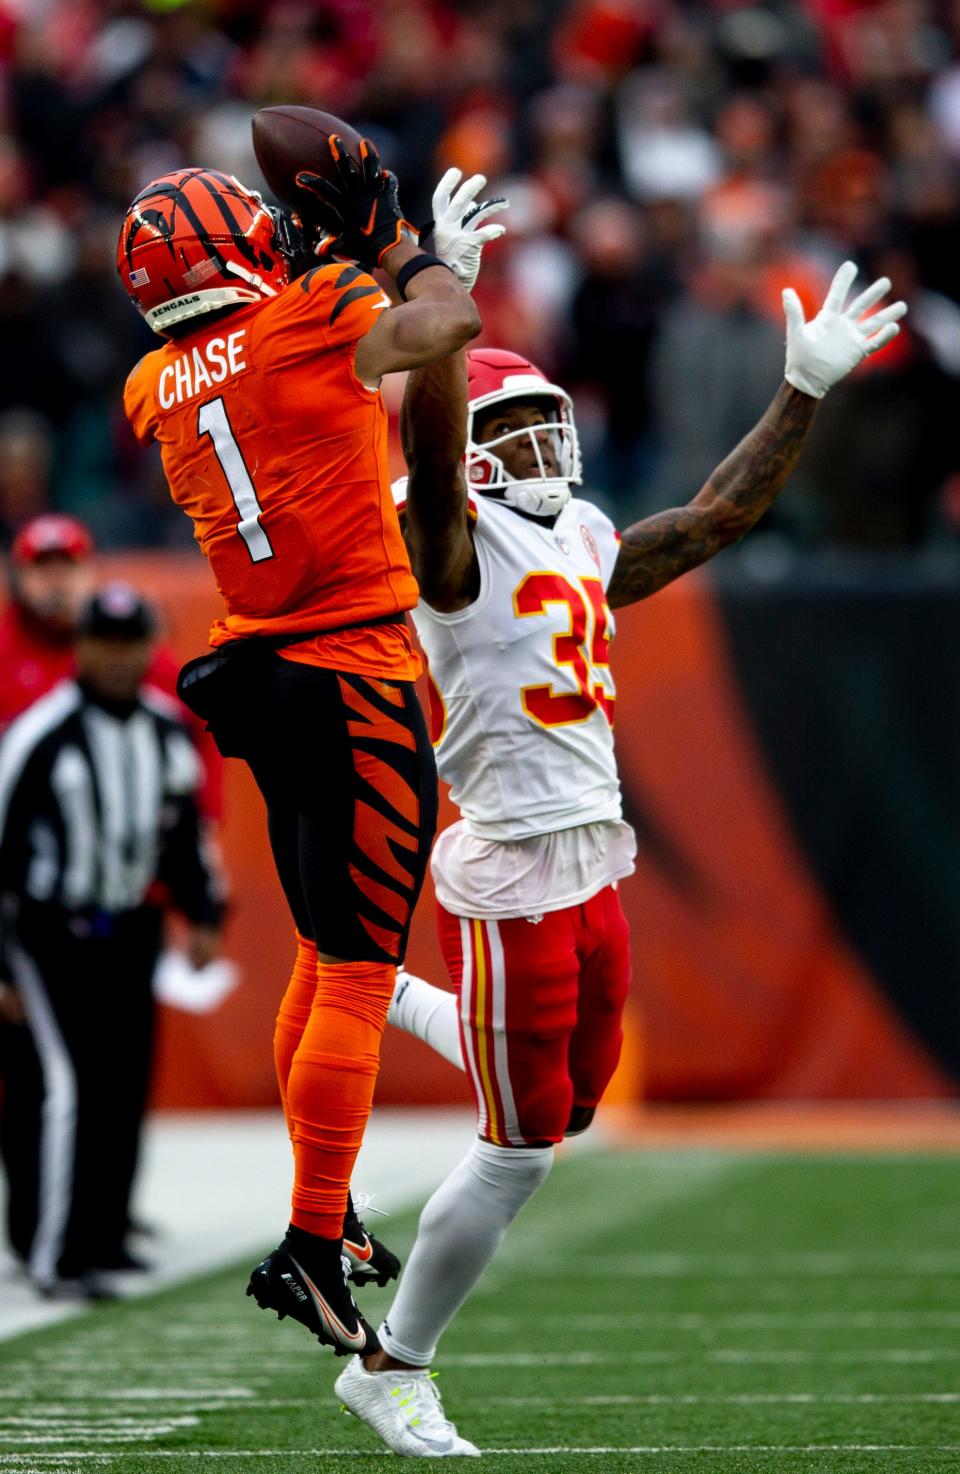 Cincinnati Bengals wide receiver Ja'Marr Chase (1) makes a catch over Kansas City Chiefs cornerback Charvarius Ward (35) in the second half of the NFL game on Sunday, Jan. 2, 2022, at Paul Brown Stadium in Cincinnati. Cincinnati Bengals defeated Kansas City Chiefs 34-31. 